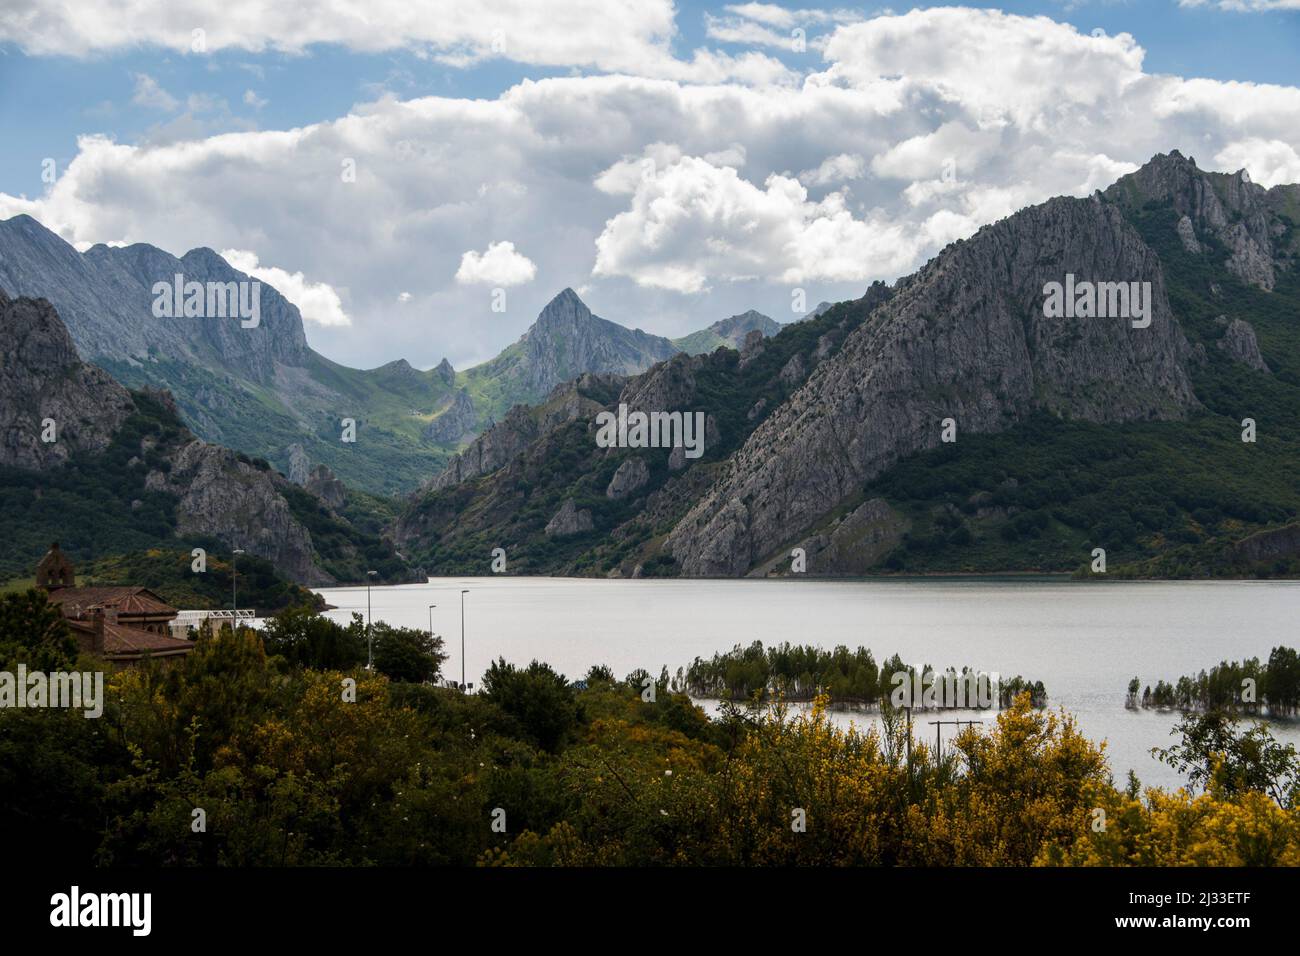 Big clouds on the sky over a mountain range with sharp peaks around a lake Stock Photo